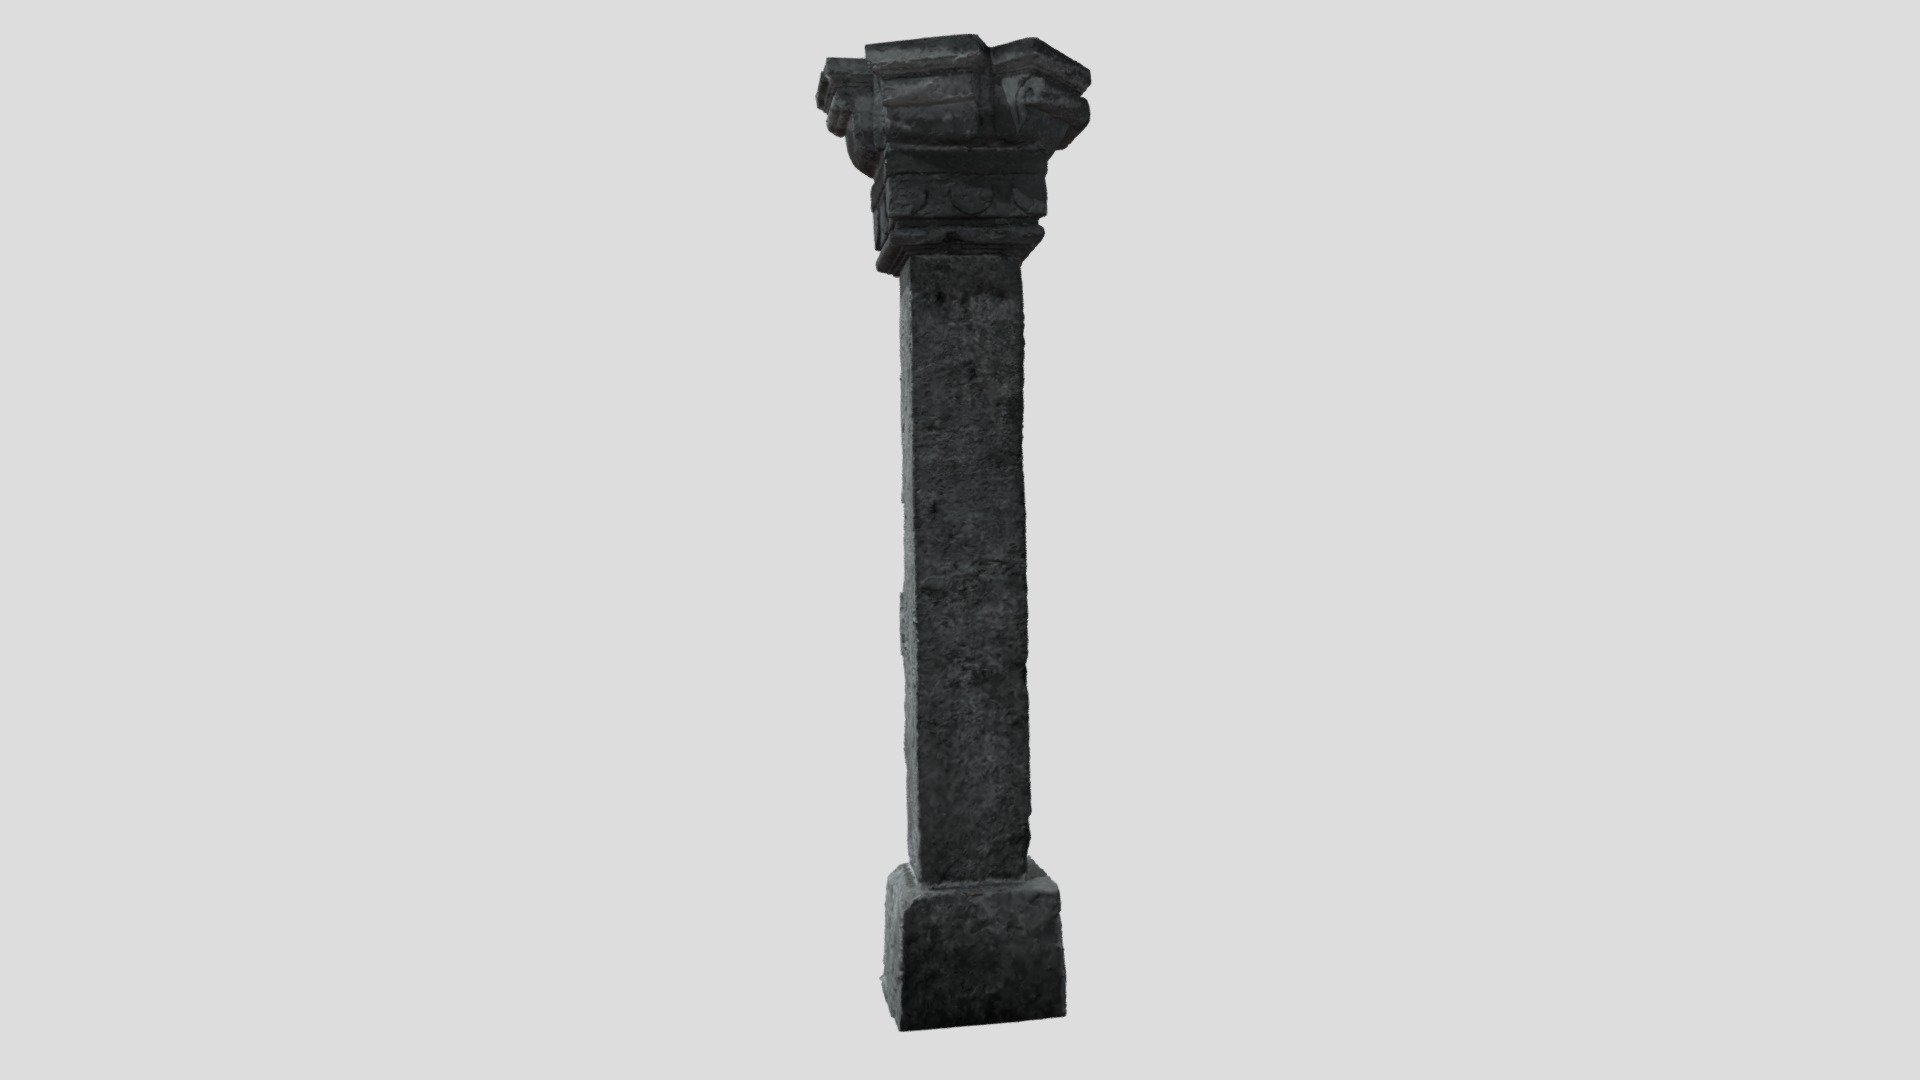 The model is a photogrammetric model made of monochrome images of a Lodi era tomb in Mehrauli Archeological Park Mehrauli, New Delhi - Column of Lodhi Tomb - 3D model by amansharma.arch 3d model